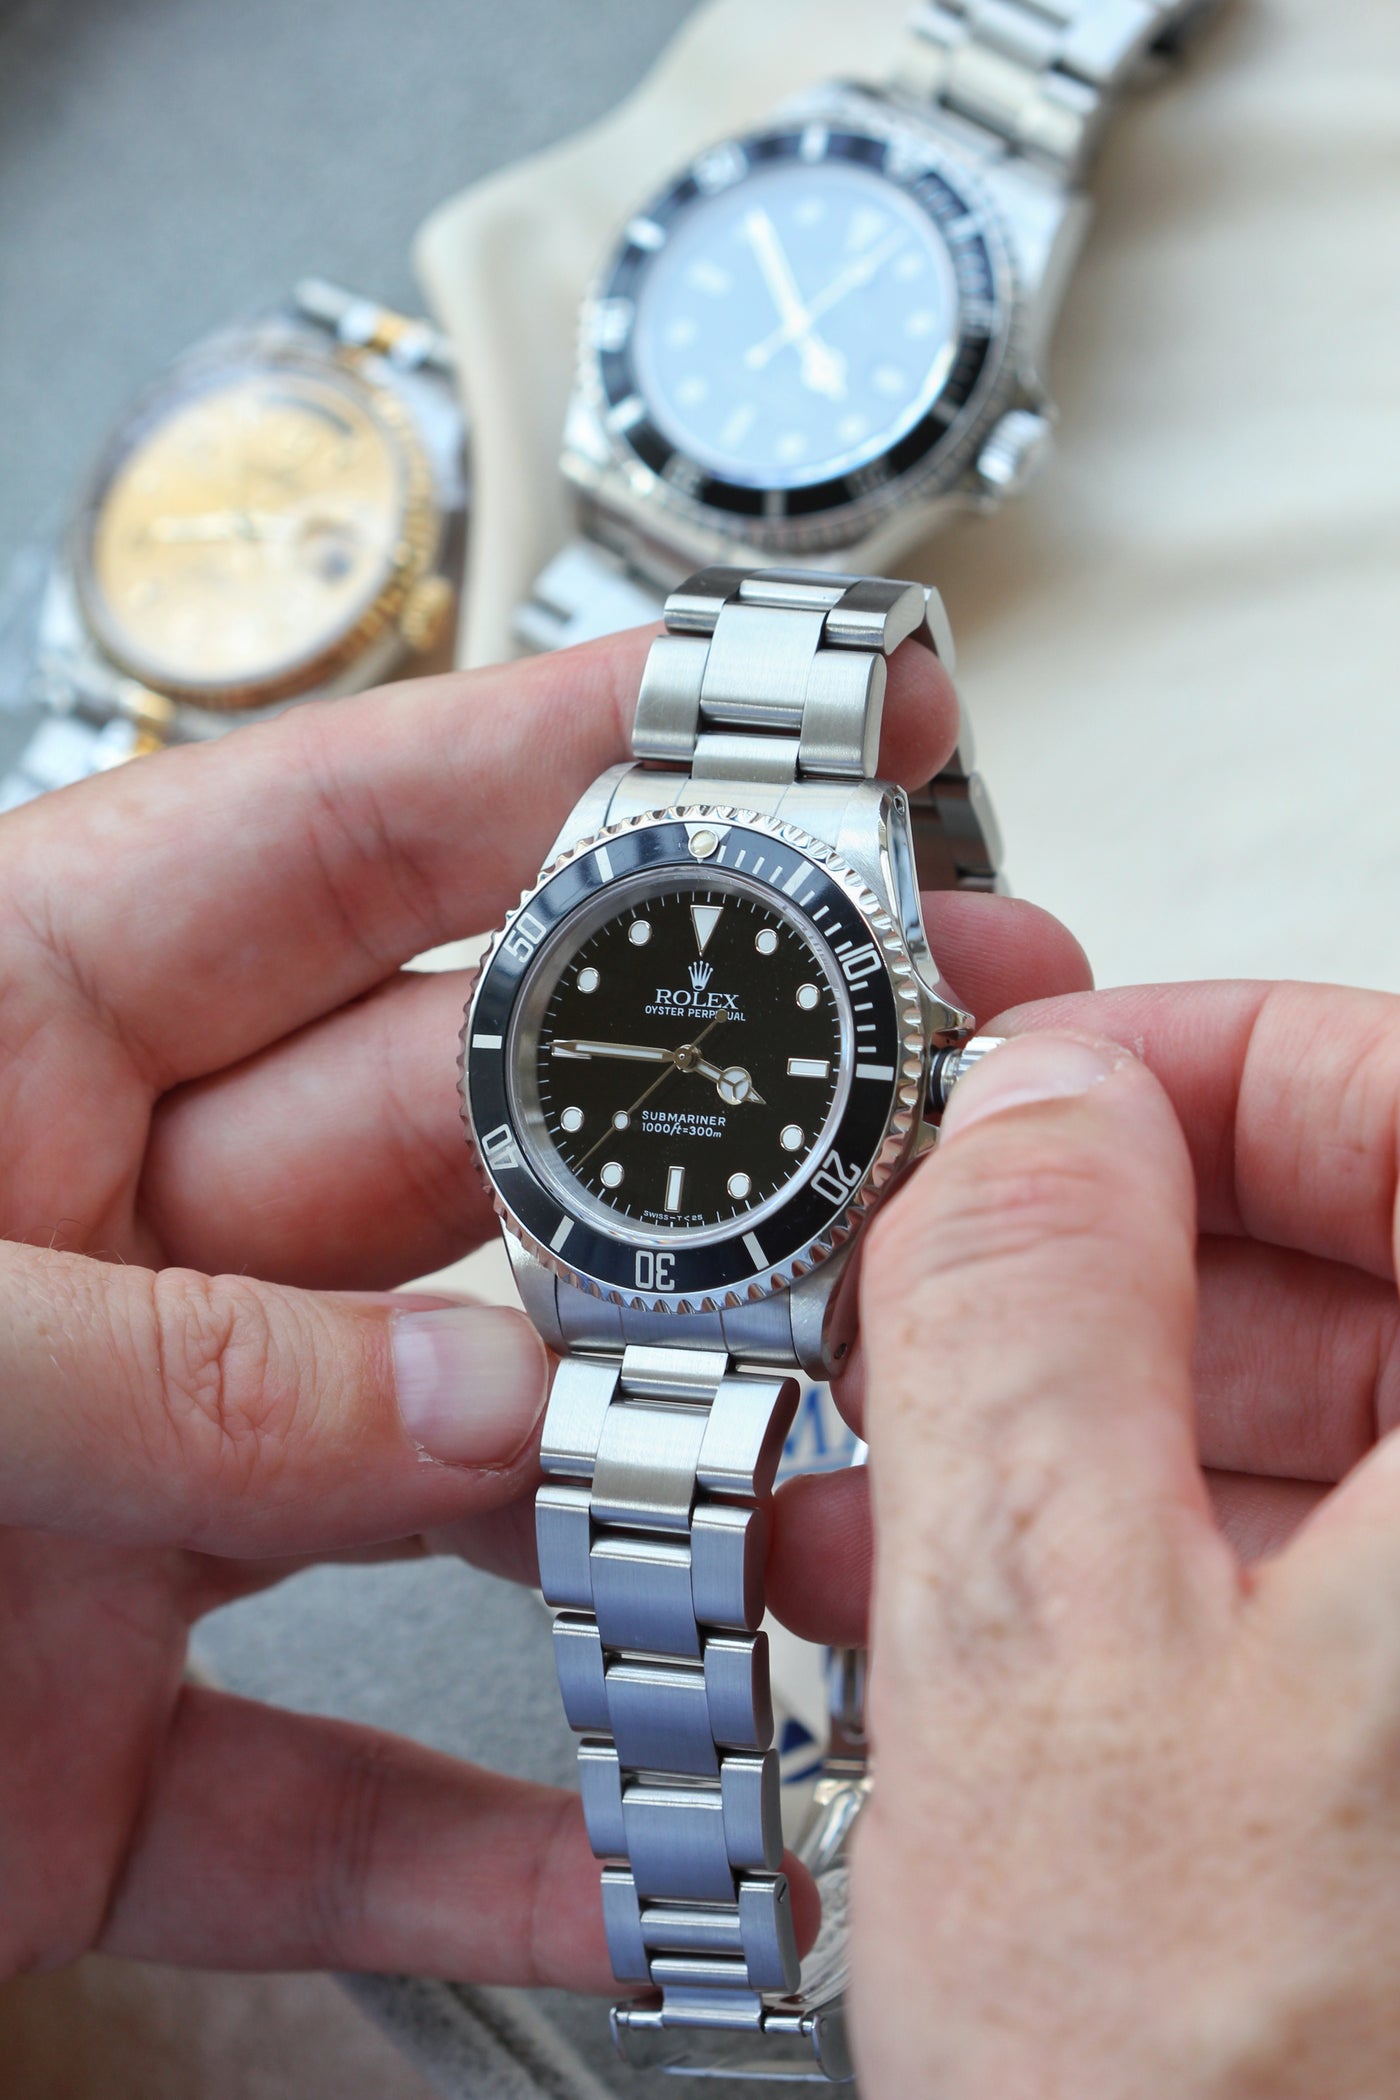 Rolex Submariner Non Date Oyster Perpetual 14060M - Parkers Jewellers